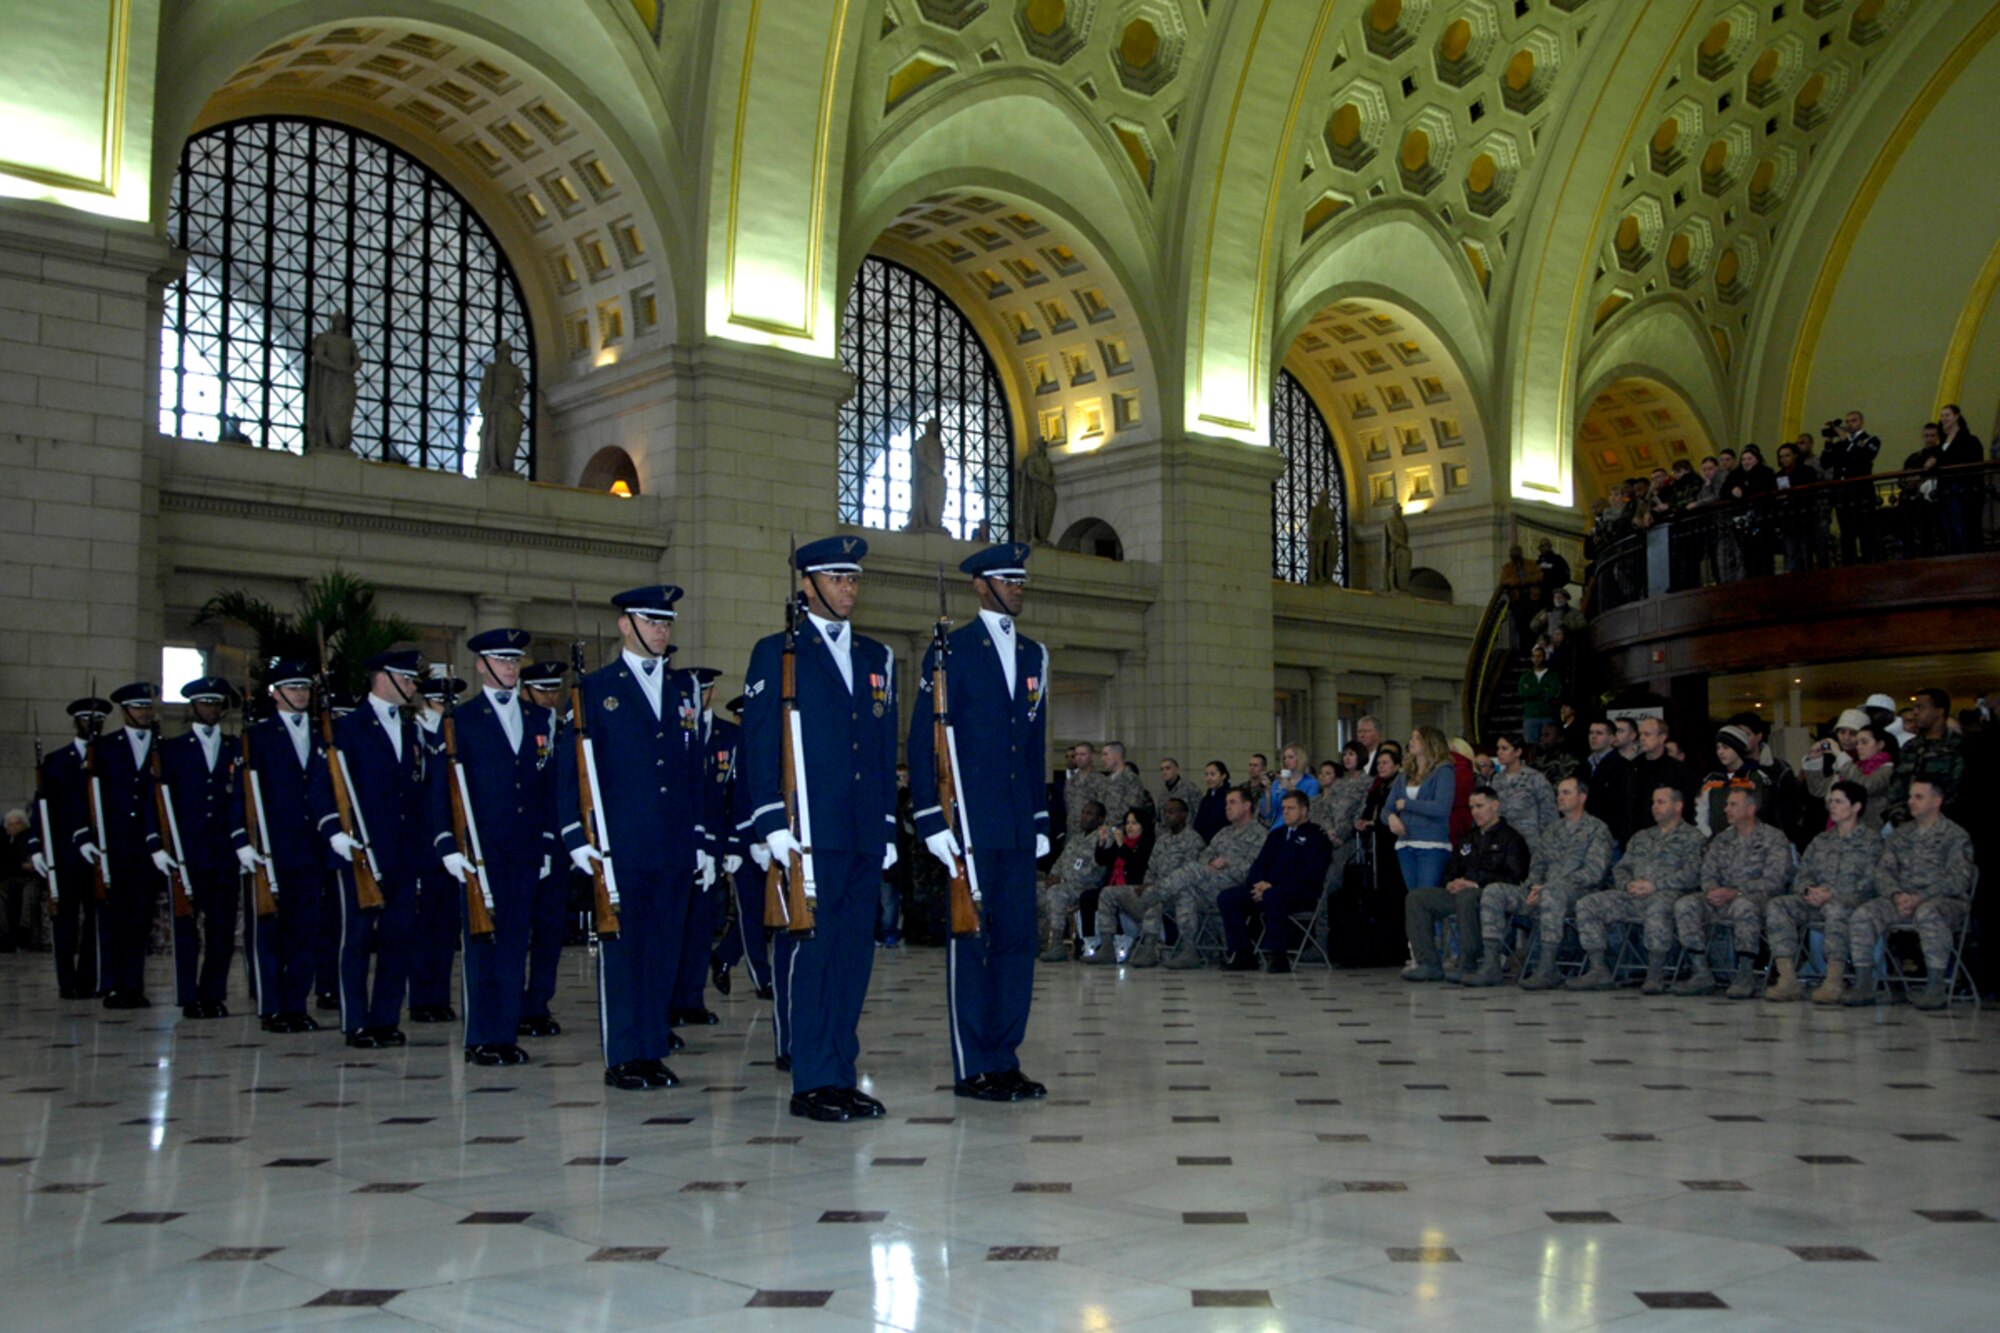 WASHINGTON, DC--The Drill Team marches in to perform their season unveiling in front of their hometown crowd at Union Station in Washington, DC. The unveiling drill is the first drill of the year before the team begins touring and the formal presentation of the 2008 team to AF leadership and the general public. The Drill Team is the traveling component of the Air Force Honor Guard and tours Air Force bases world wide showcasing the precision of today's Air Force to recruit, retain, and inspire Airmen for the Air Force mission. (U.S. Air Force photo by Senior Airman Sean Adams)(Released)